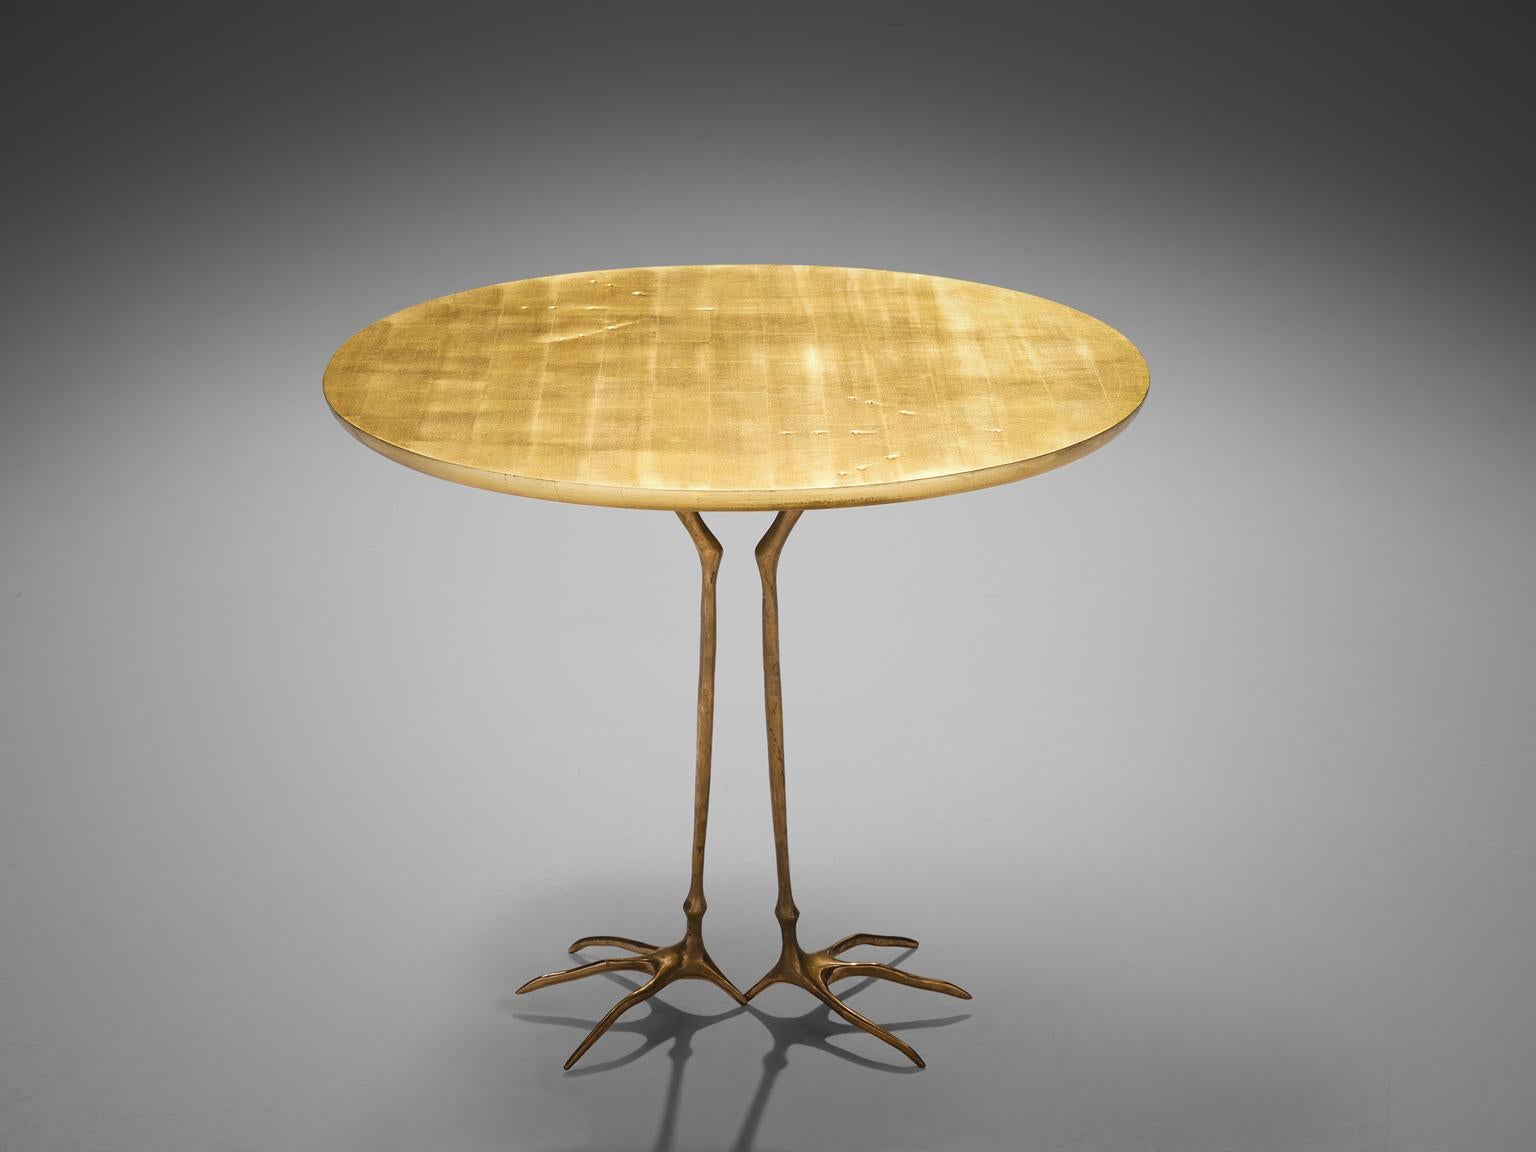 Méret Oppenheim for Simon Gavina, 'Traccia' coffee table, in bronze, gold leaf and wood, Italy, 1970s.

This side table by surrealist artist Méret Oppenheim is part of the 1972 serial production, called 'Ultramobile', of the original design she made